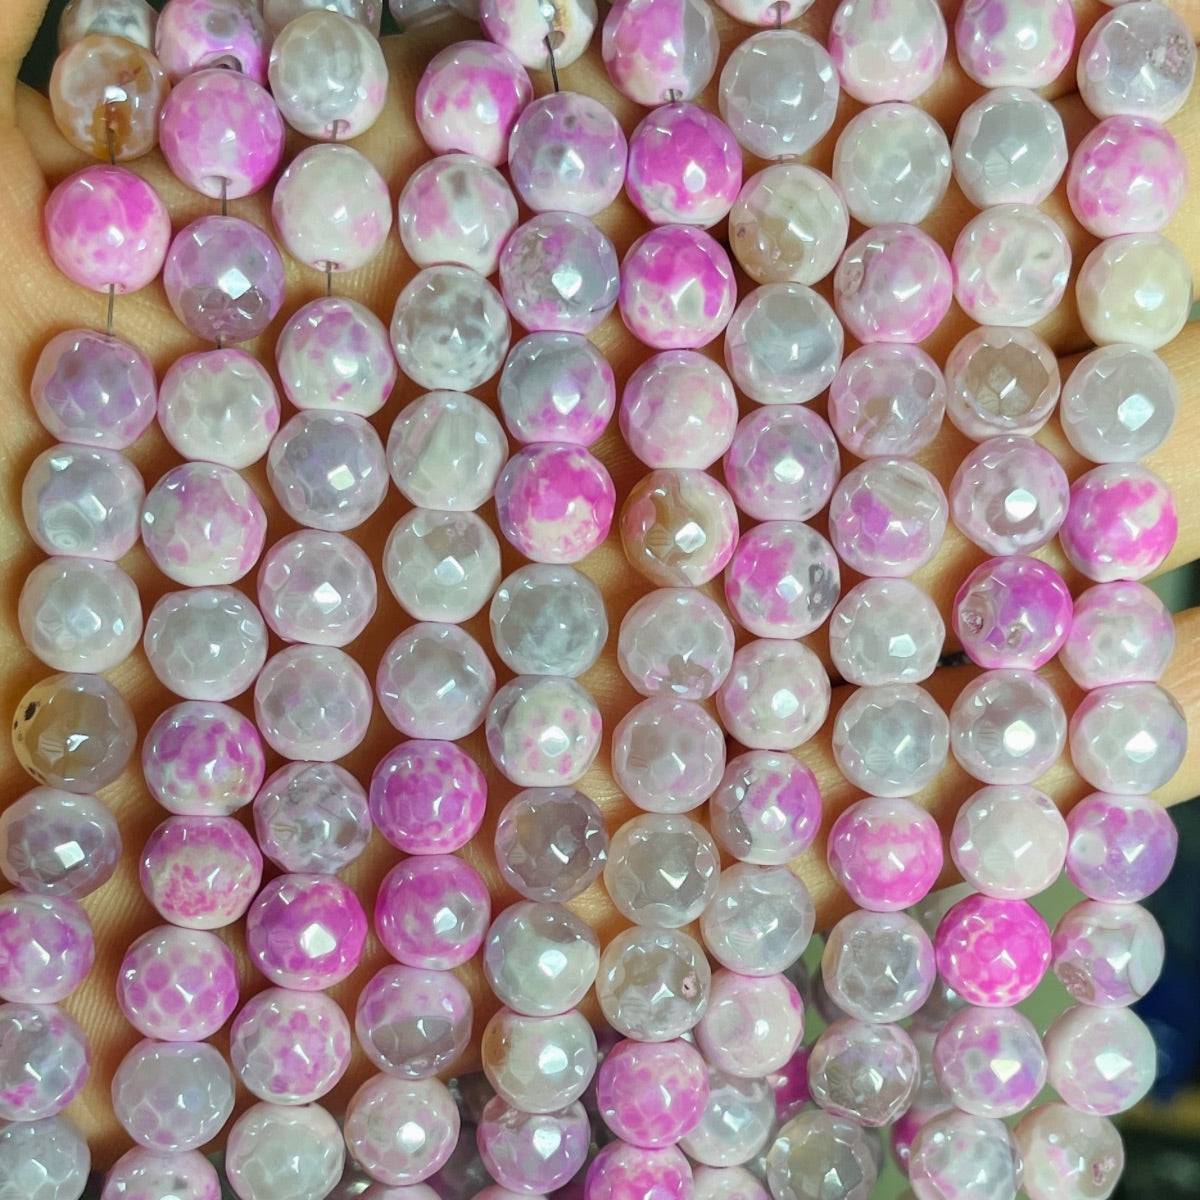 2 Strands/lot 8mm Electroplated Pink Fire Agate Faceted Stone Beads Electroplated Beads Breast Cancer Awareness Electroplated Faceted Agate Beads New Beads Arrivals Charms Beads Beyond